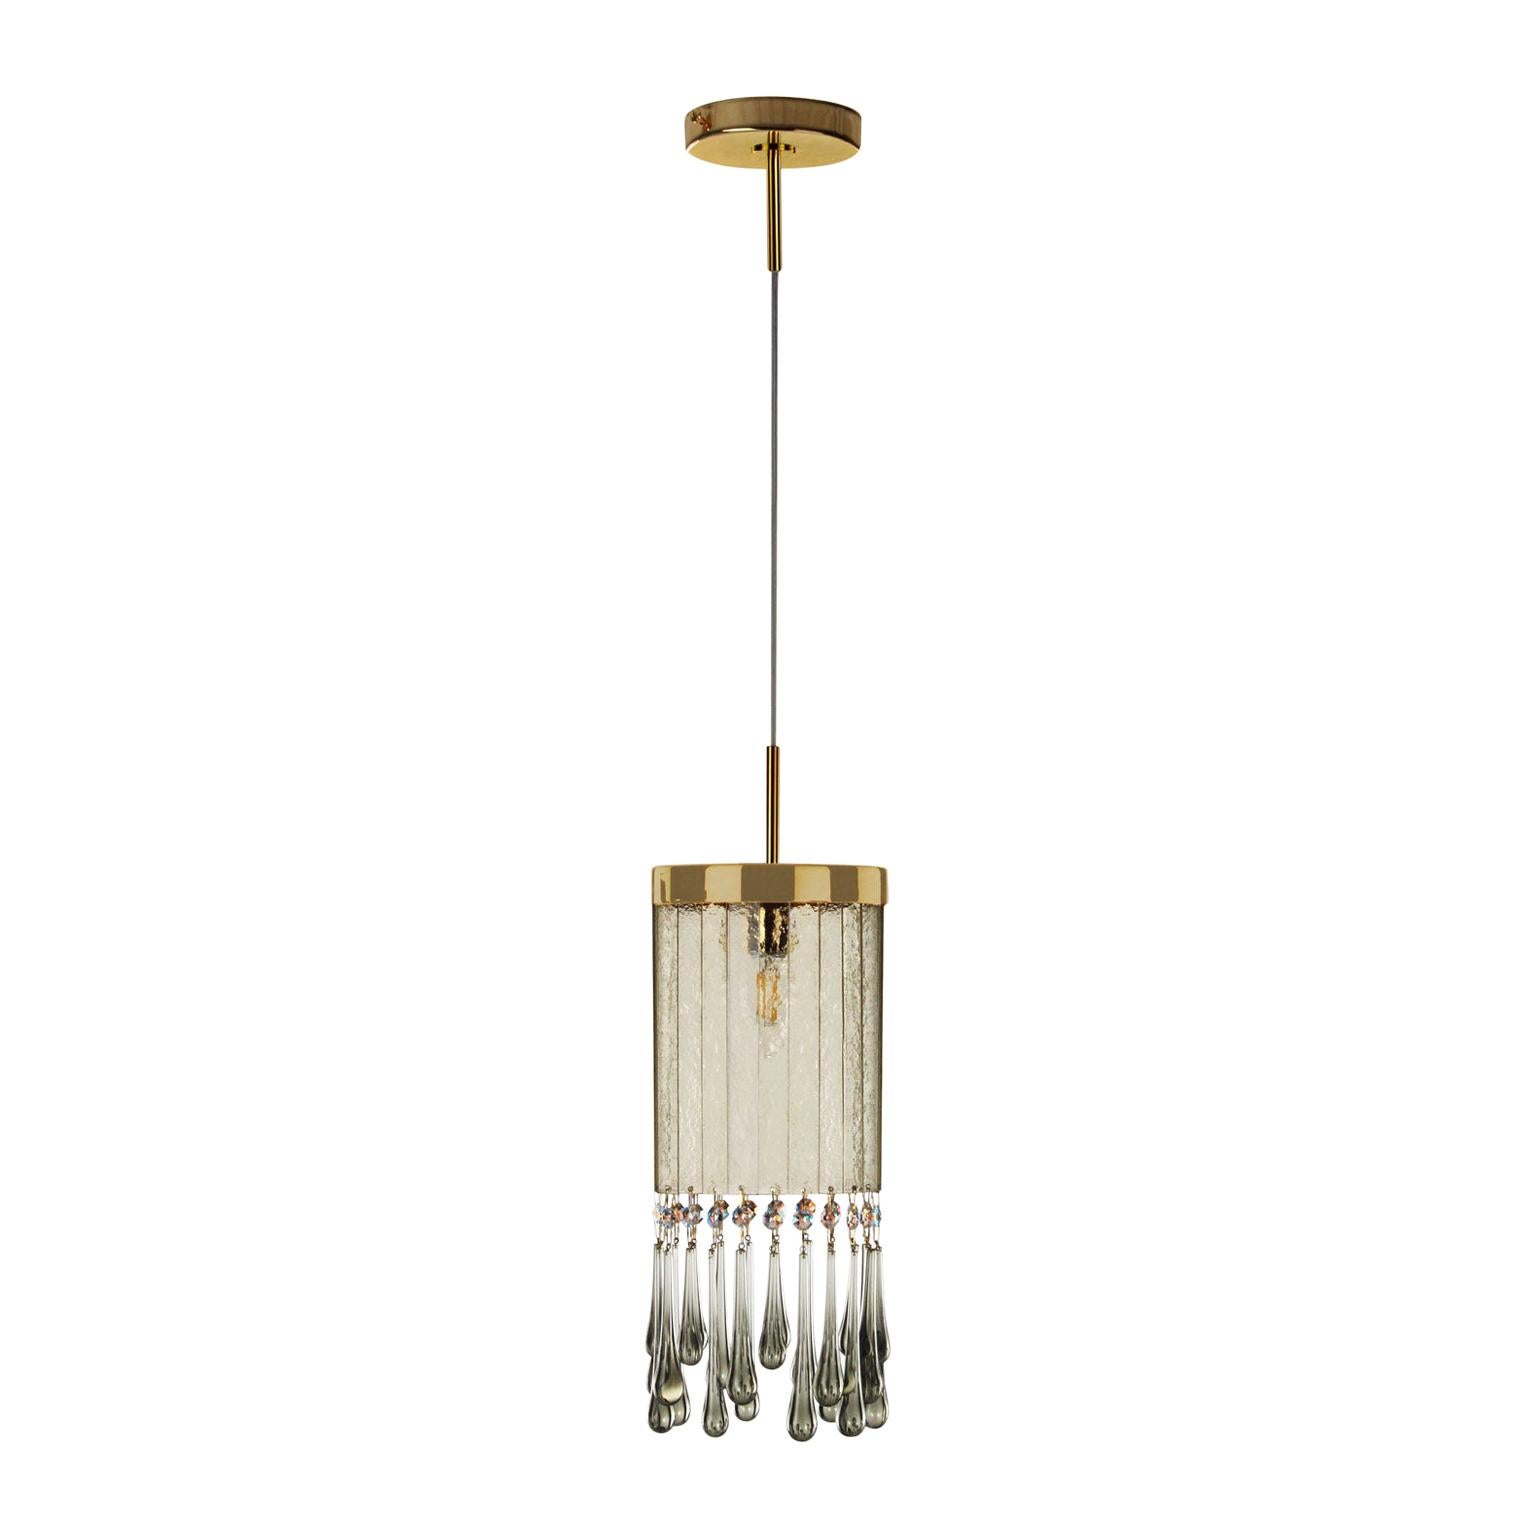 Artistic suspension 1 light Grey Murano Glass and faceted elements by Multiforme